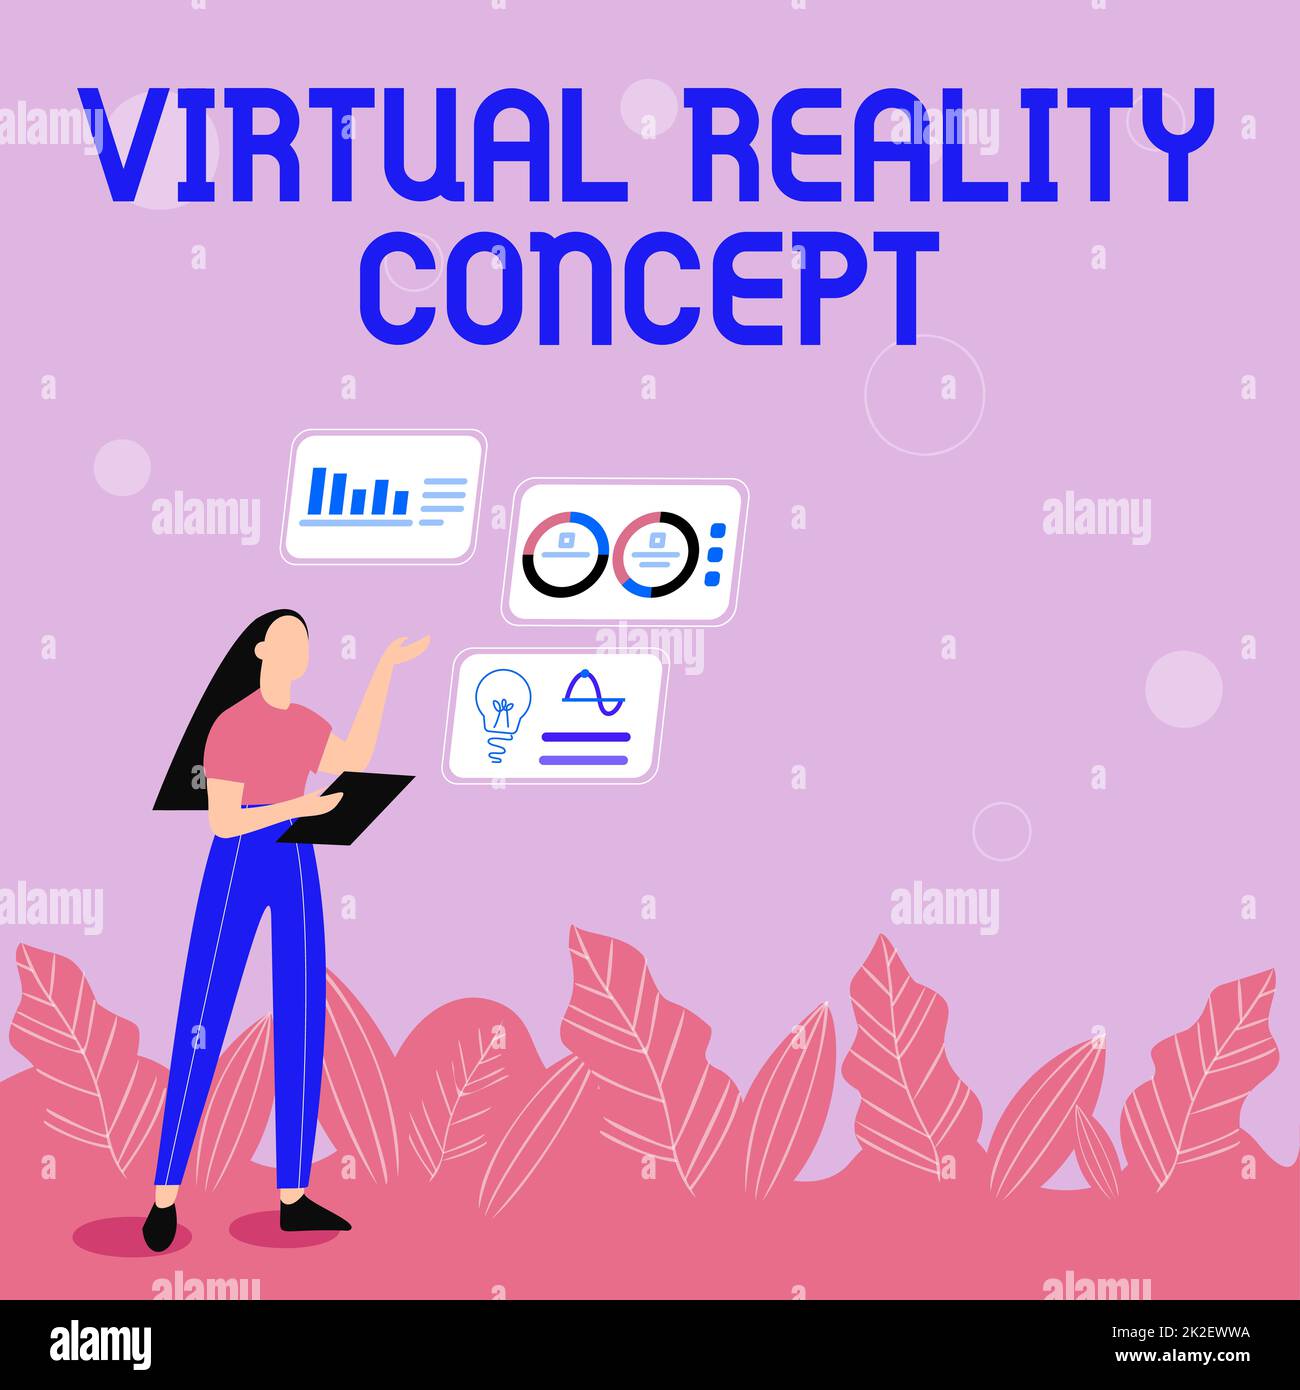 Hand writing sign Virtual Reality Concept. Business idea Virtual Reality Concept Illustration Of Girl Sharing Ideas For Skill Discussing Work Strategies. Stock Photo